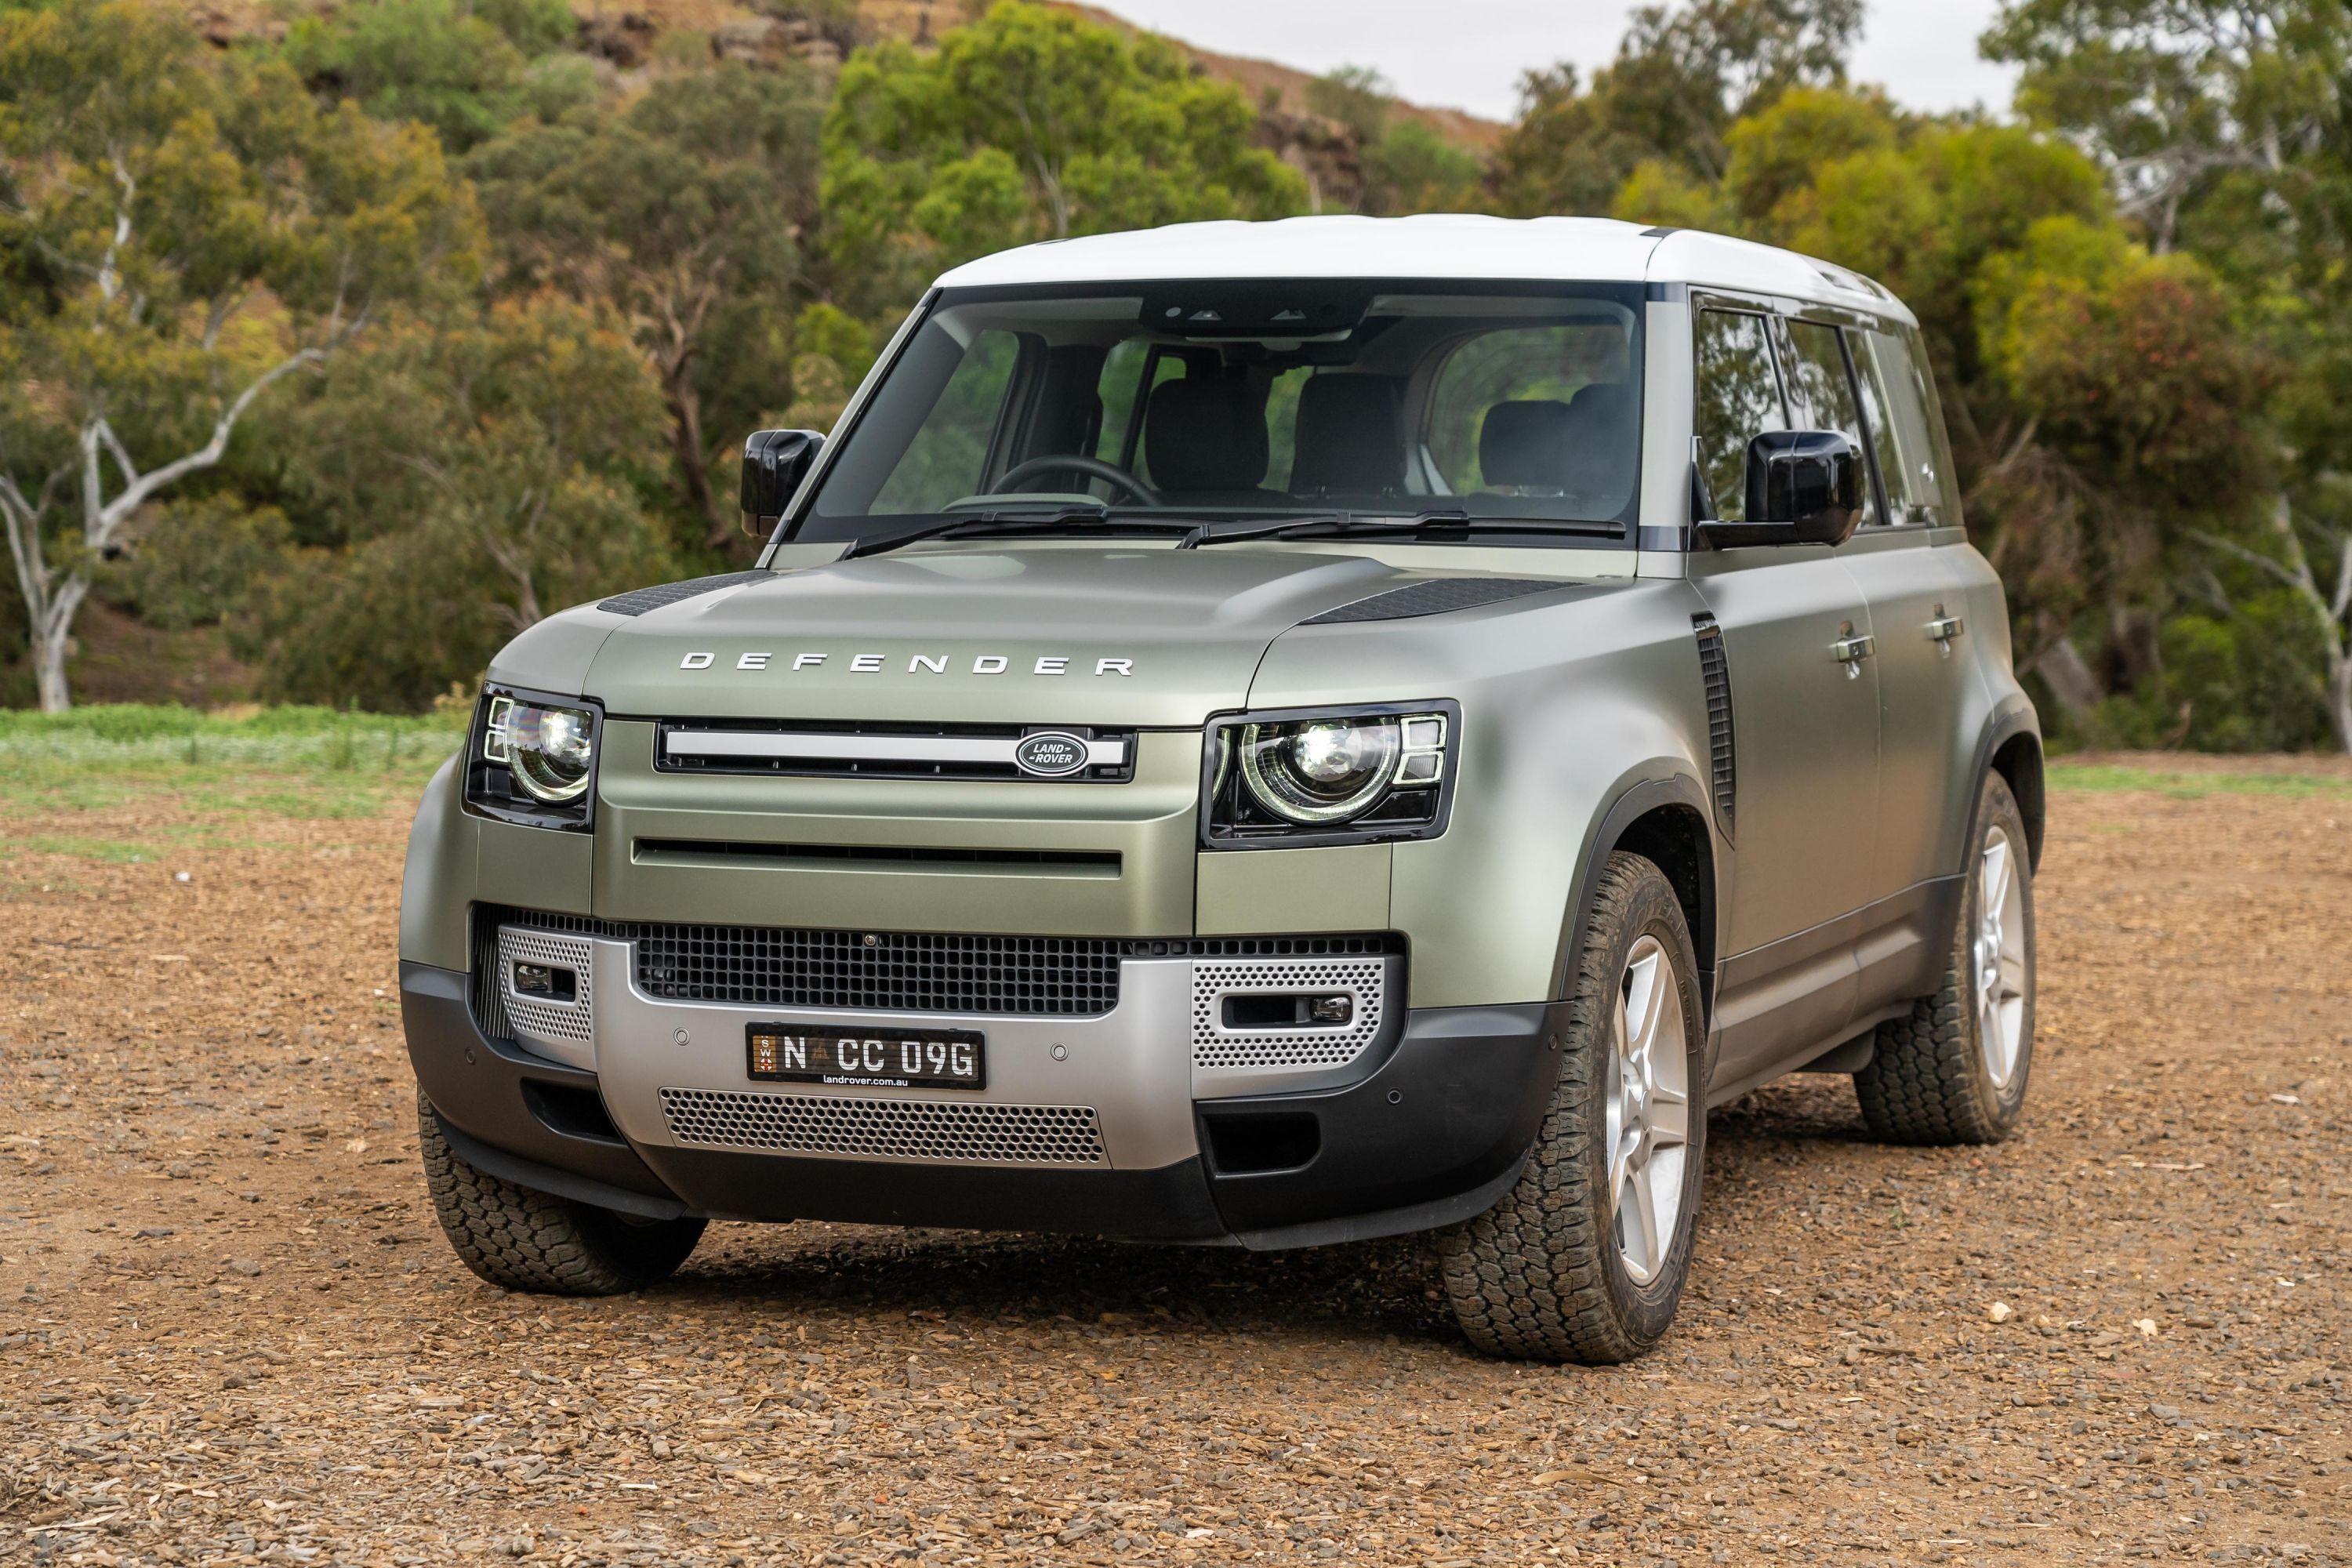 2021 Land Rover Defender, Discovery recalled | CarExpert